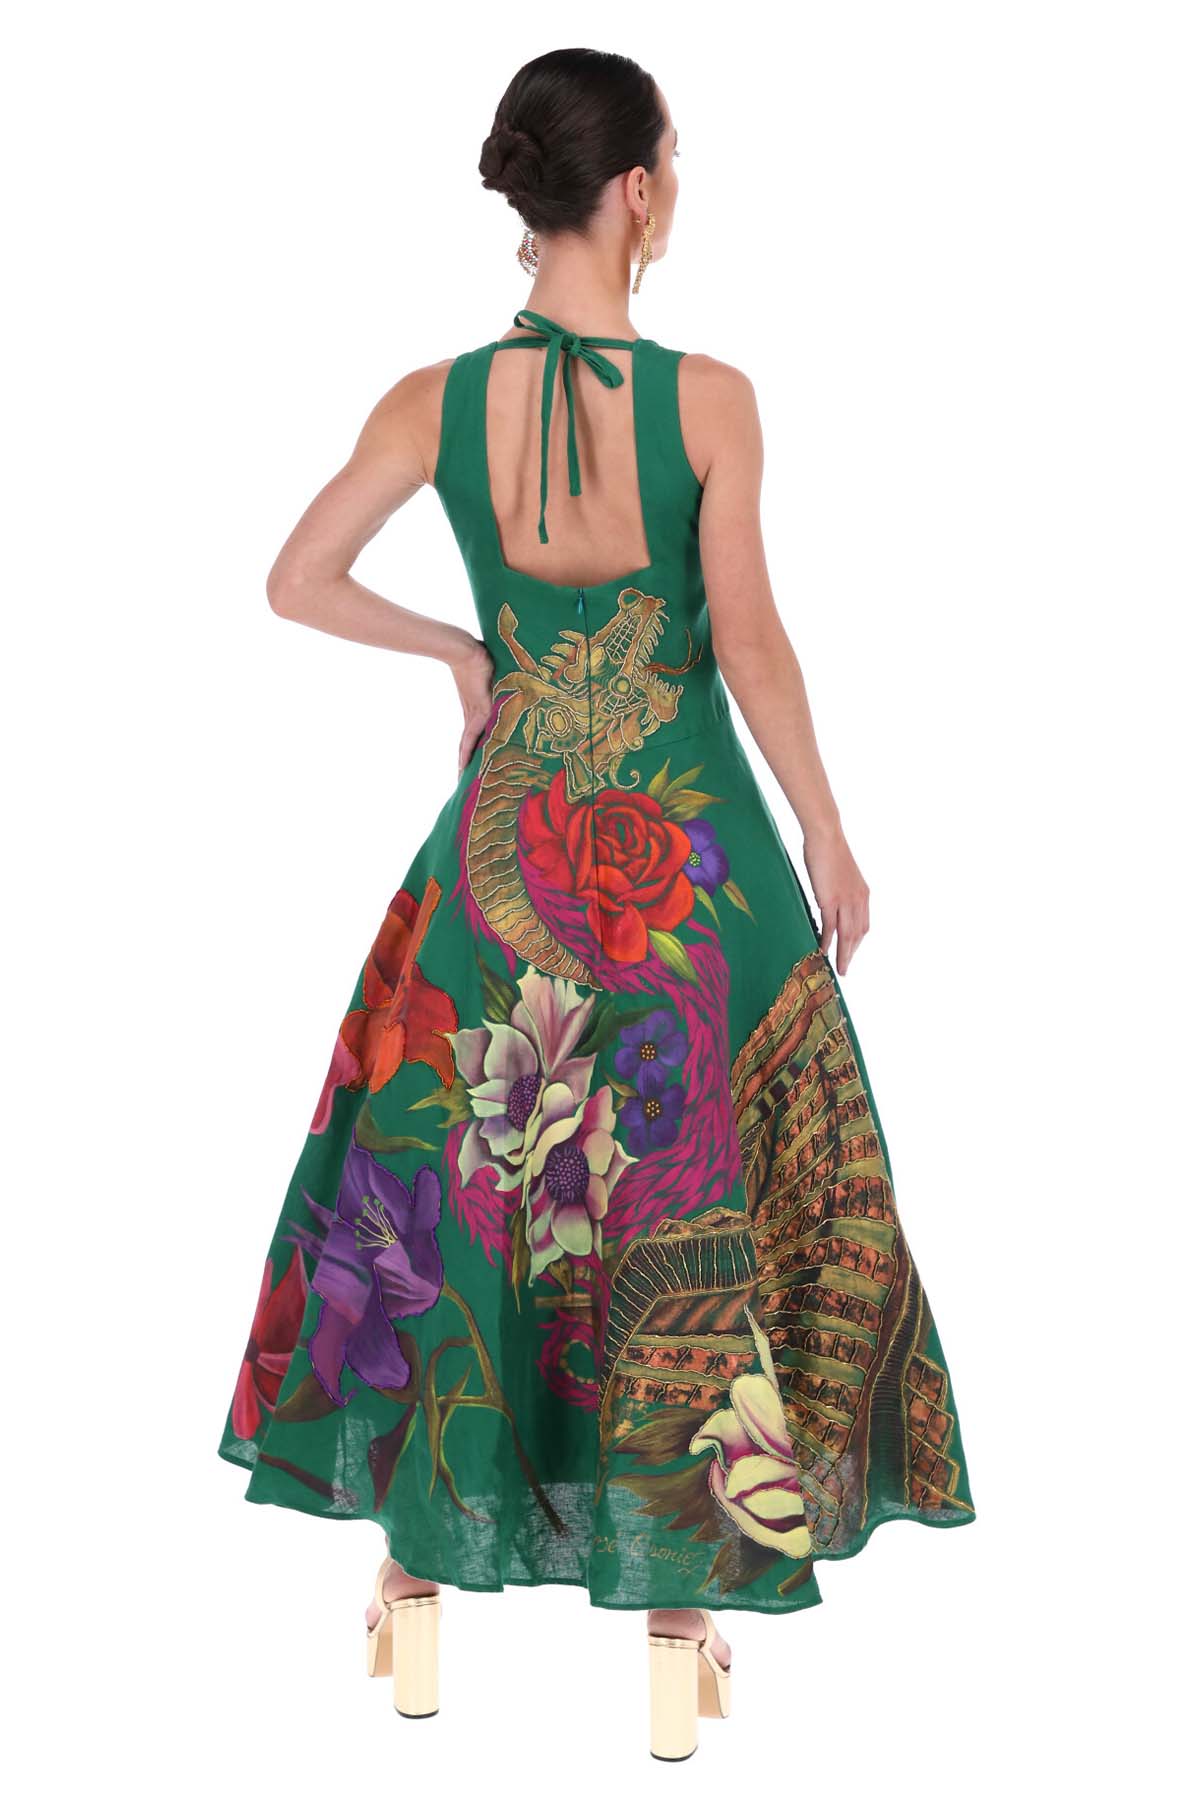 HAND PAINTED AND EMBROIDERED BELL MIDI DRESS - XOCHIQUETZAL